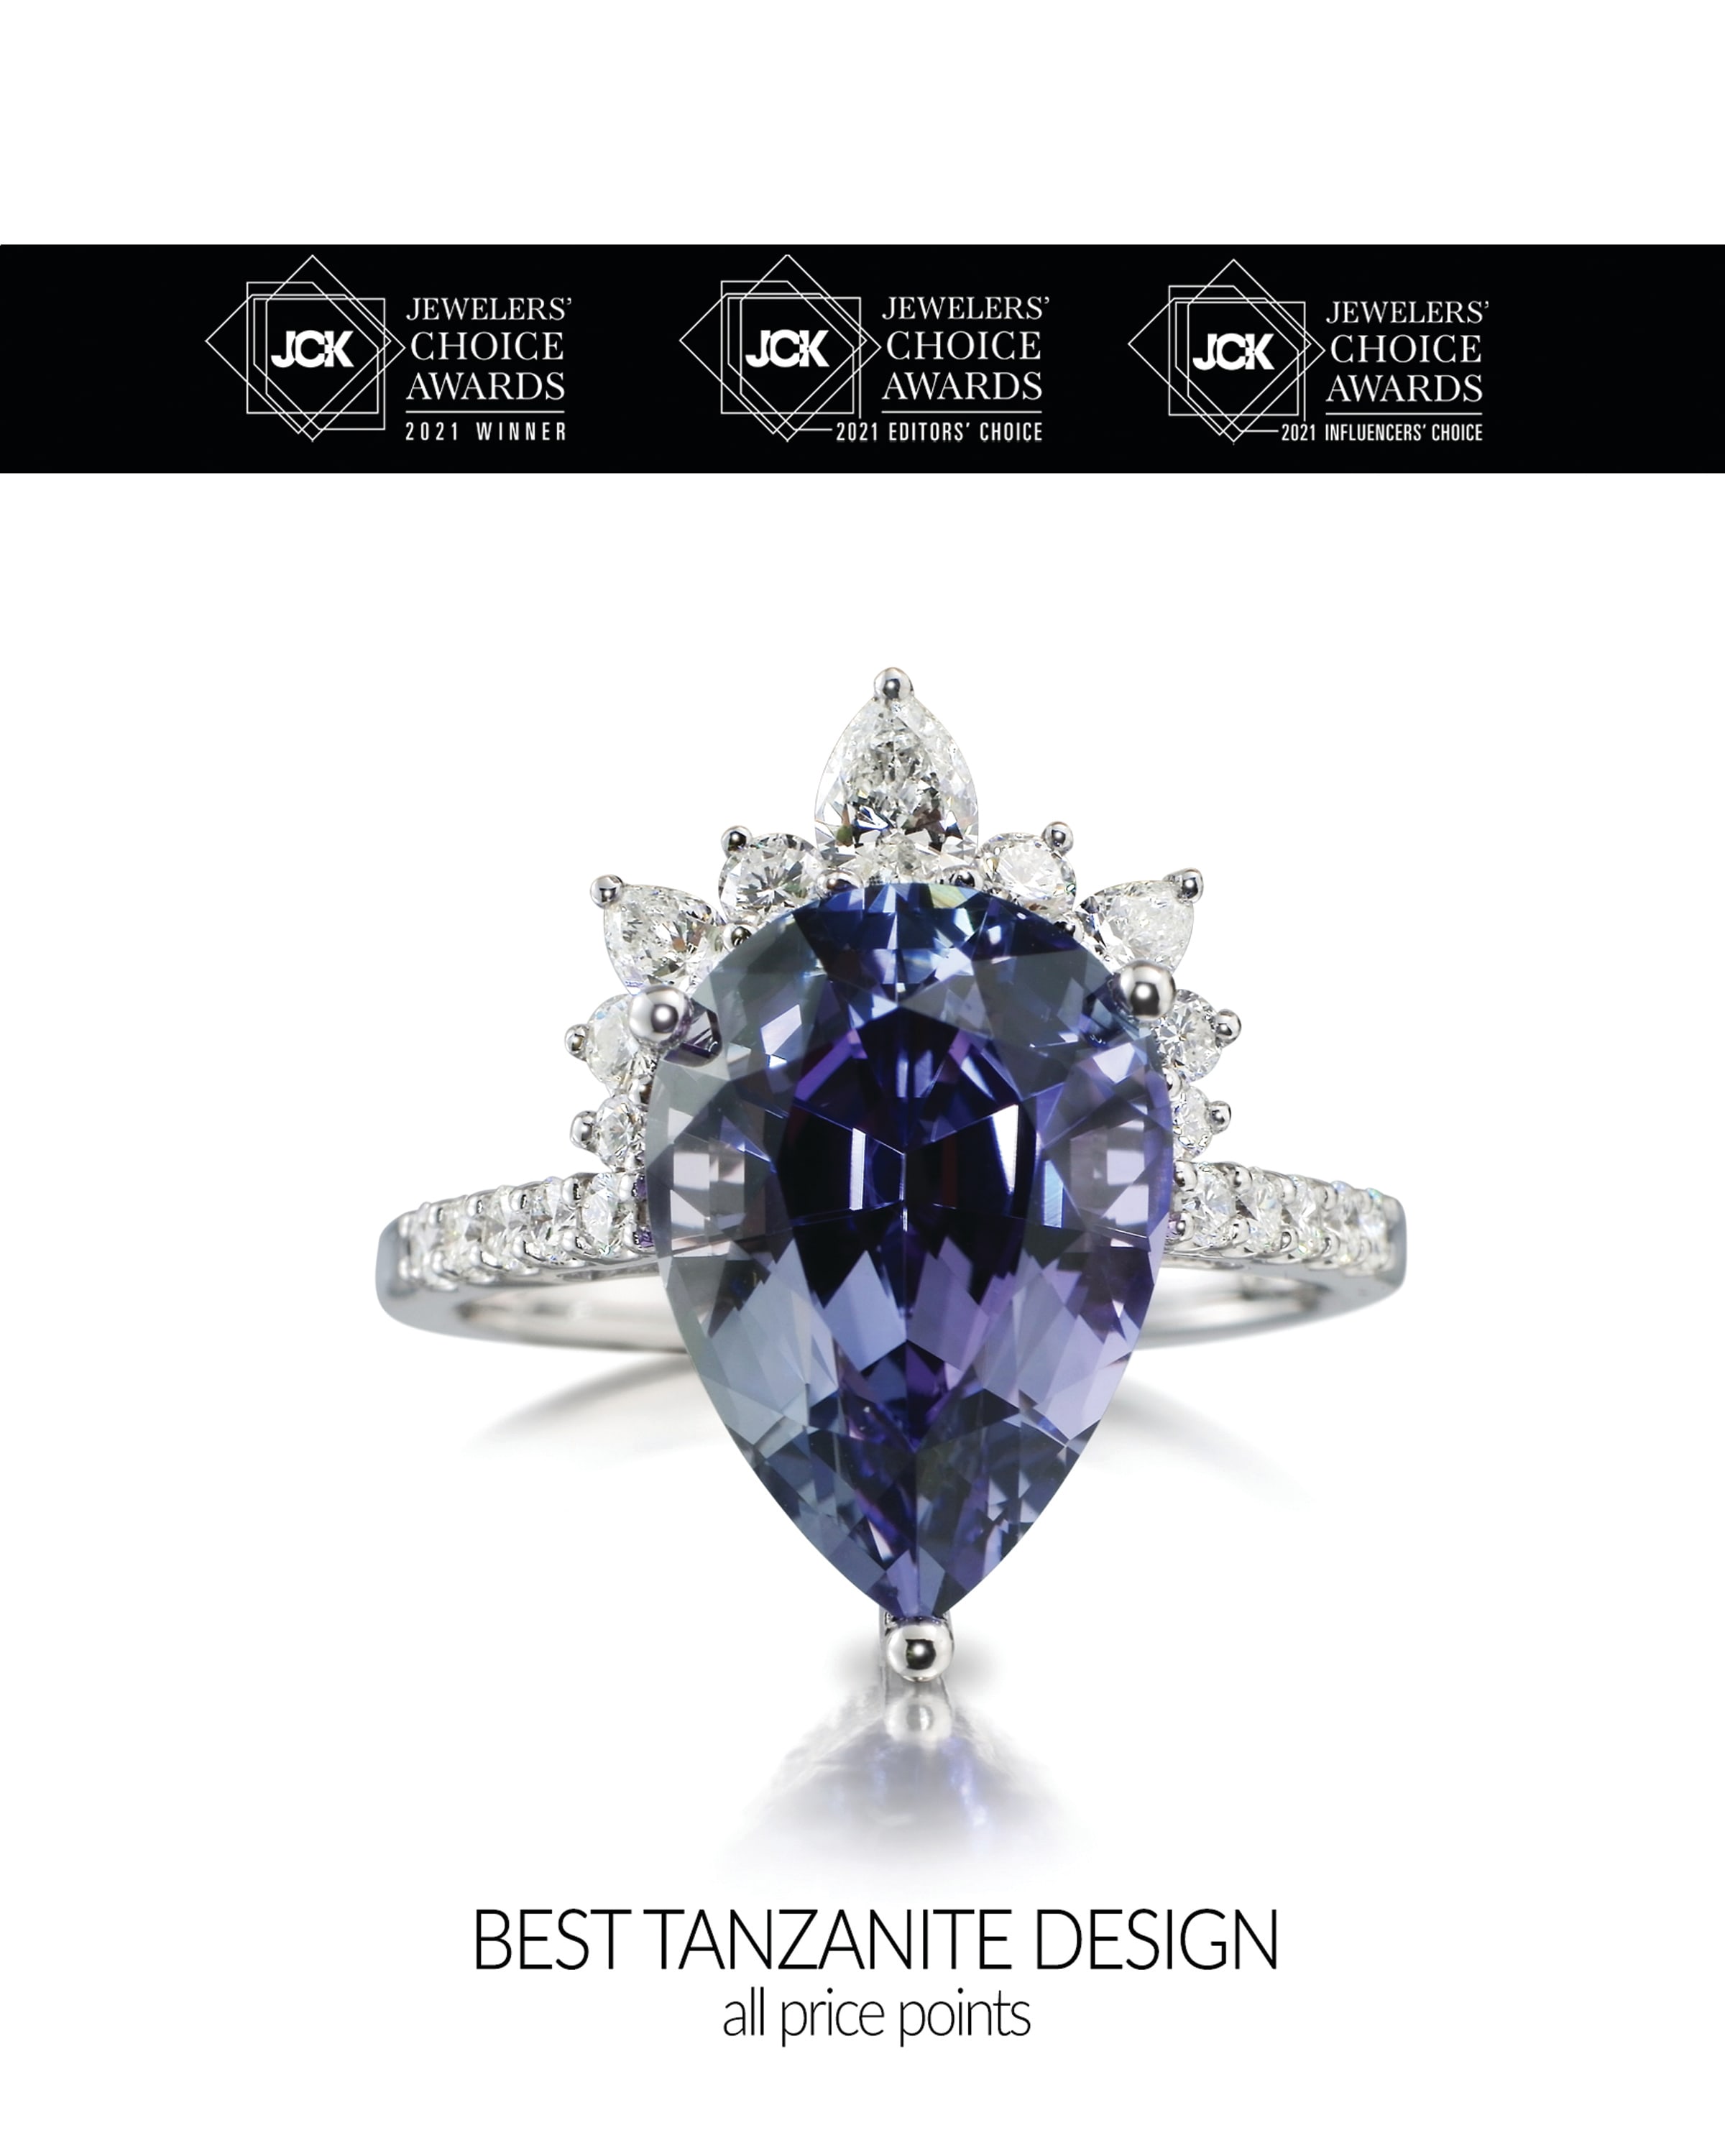 2021 JCK BEST TANZANITE JEWELRY - all price point  |
A colorful 6.37ct Peacock Tanzanite is the crowning center for this amazing ring. Meticulously handcrafted in 100% recycled 18kt white gold using responsibly sourced gemstones, and made in the USA.